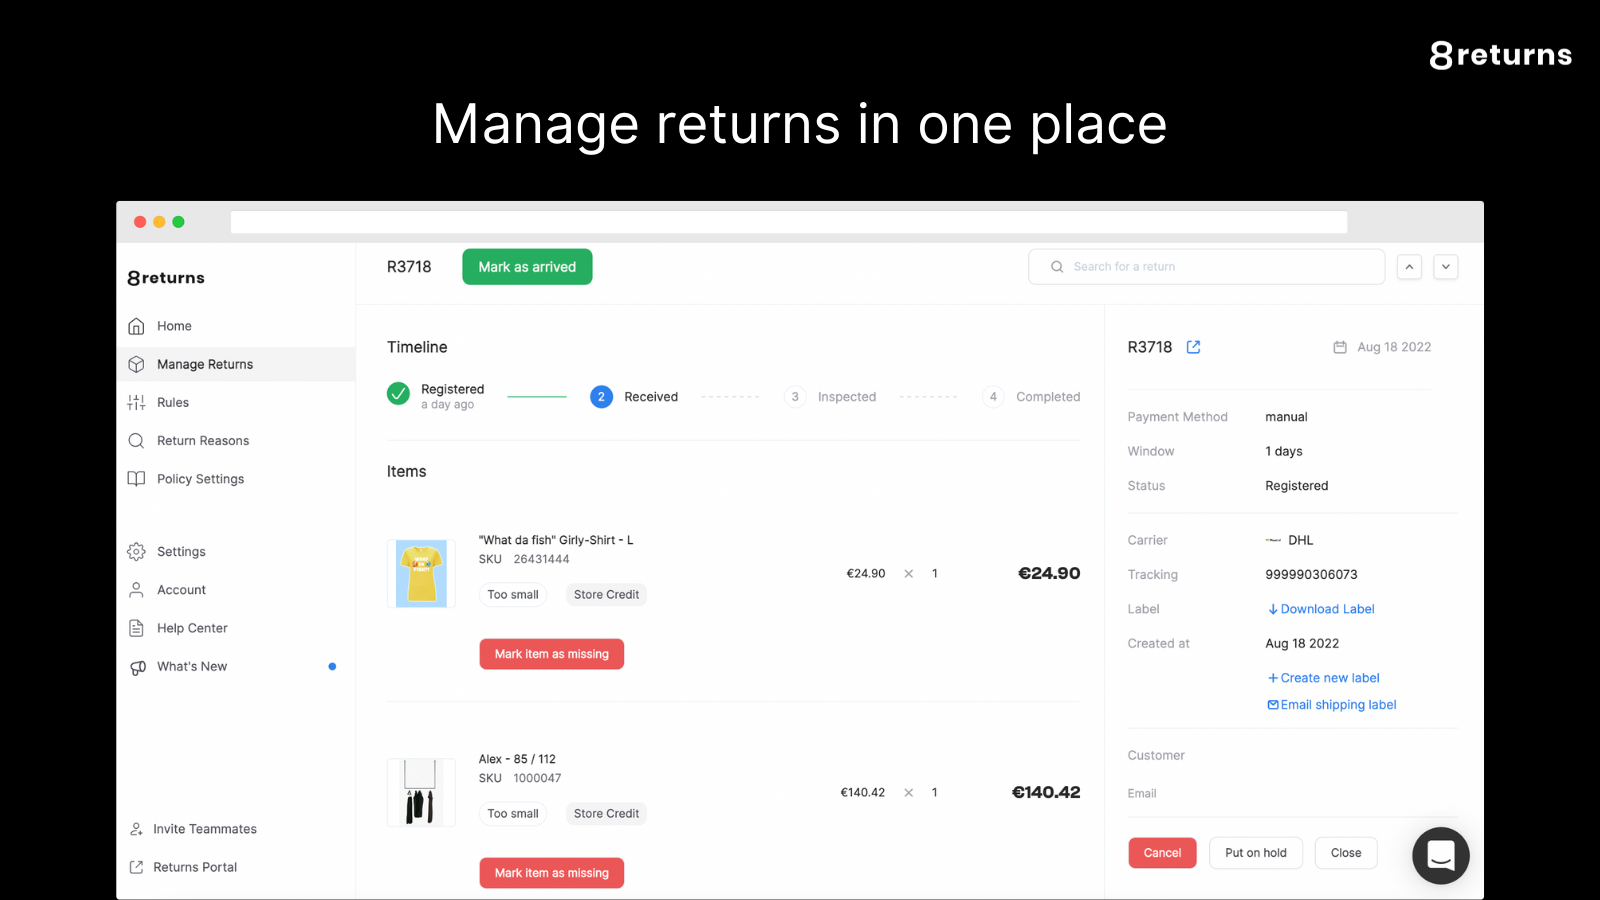 Manage returns in one place